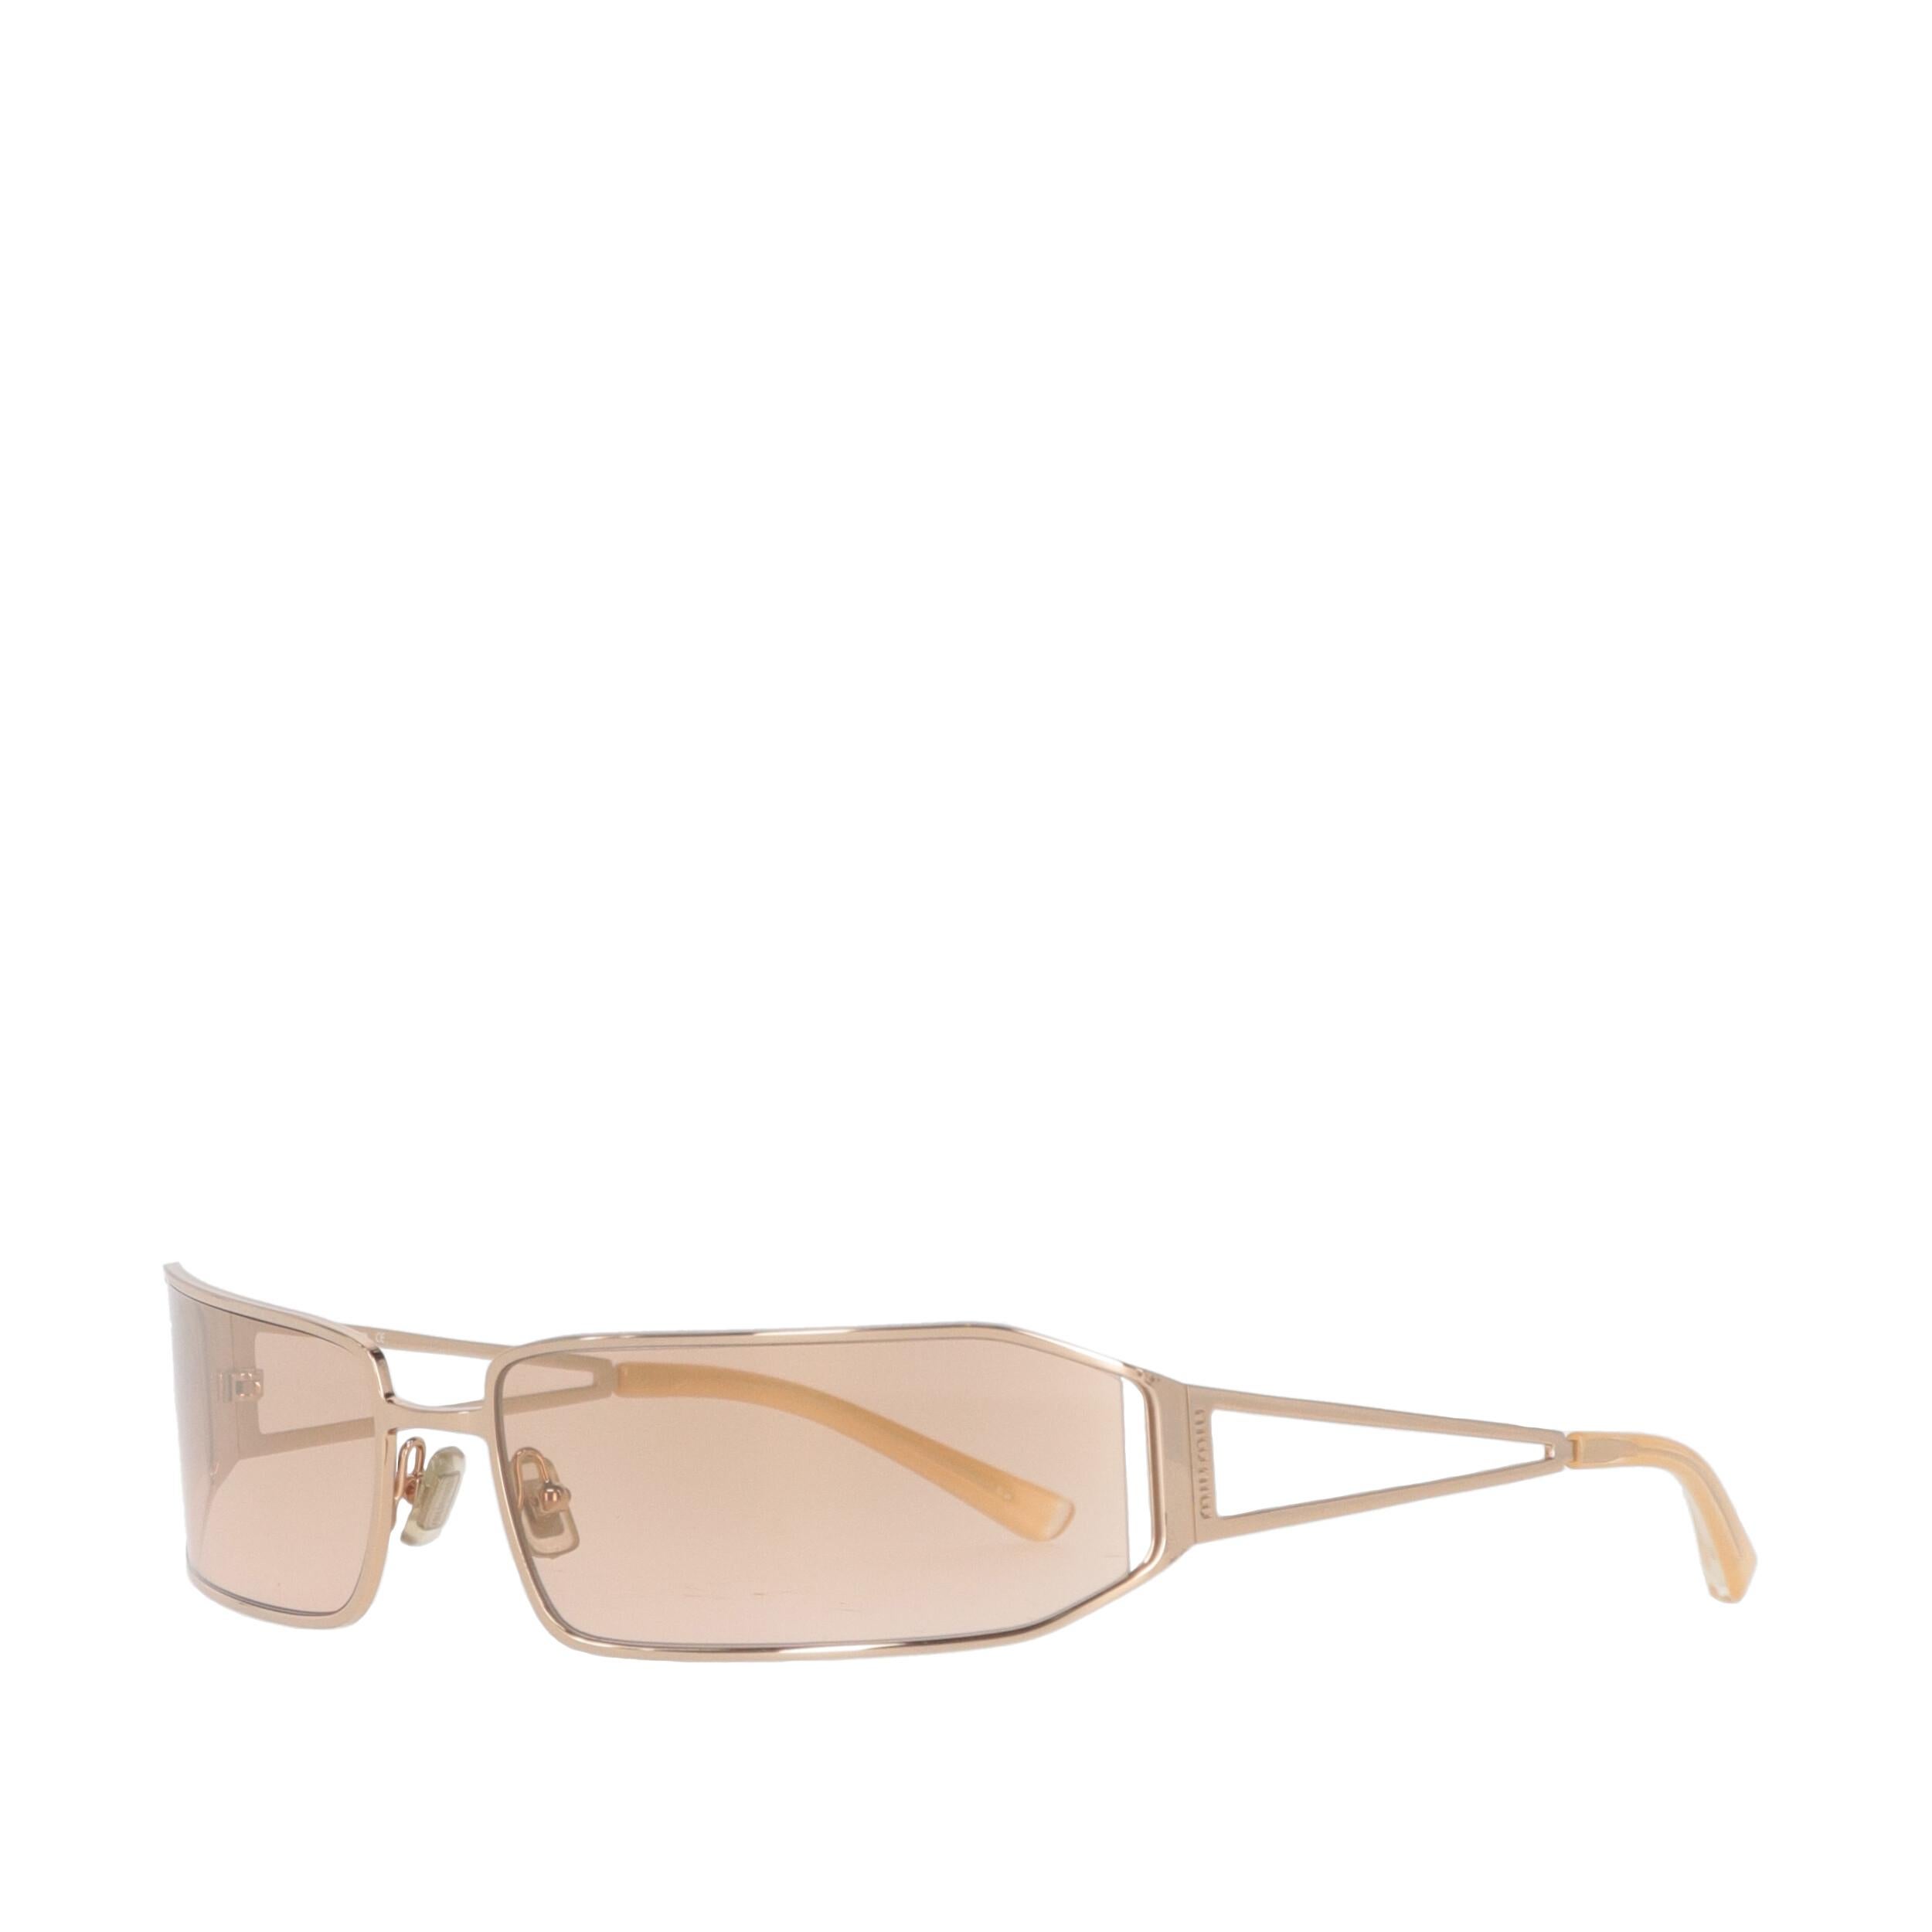 Miu Miu gold-tone metal thin frame sunglasses with slightly curved lenses.
Sunglasses show a light scratch on the right lens.

Please note, this item cannot be shipped to the US.

Years: 2000s

Width: 16 cm
Height: 3,3 cm
